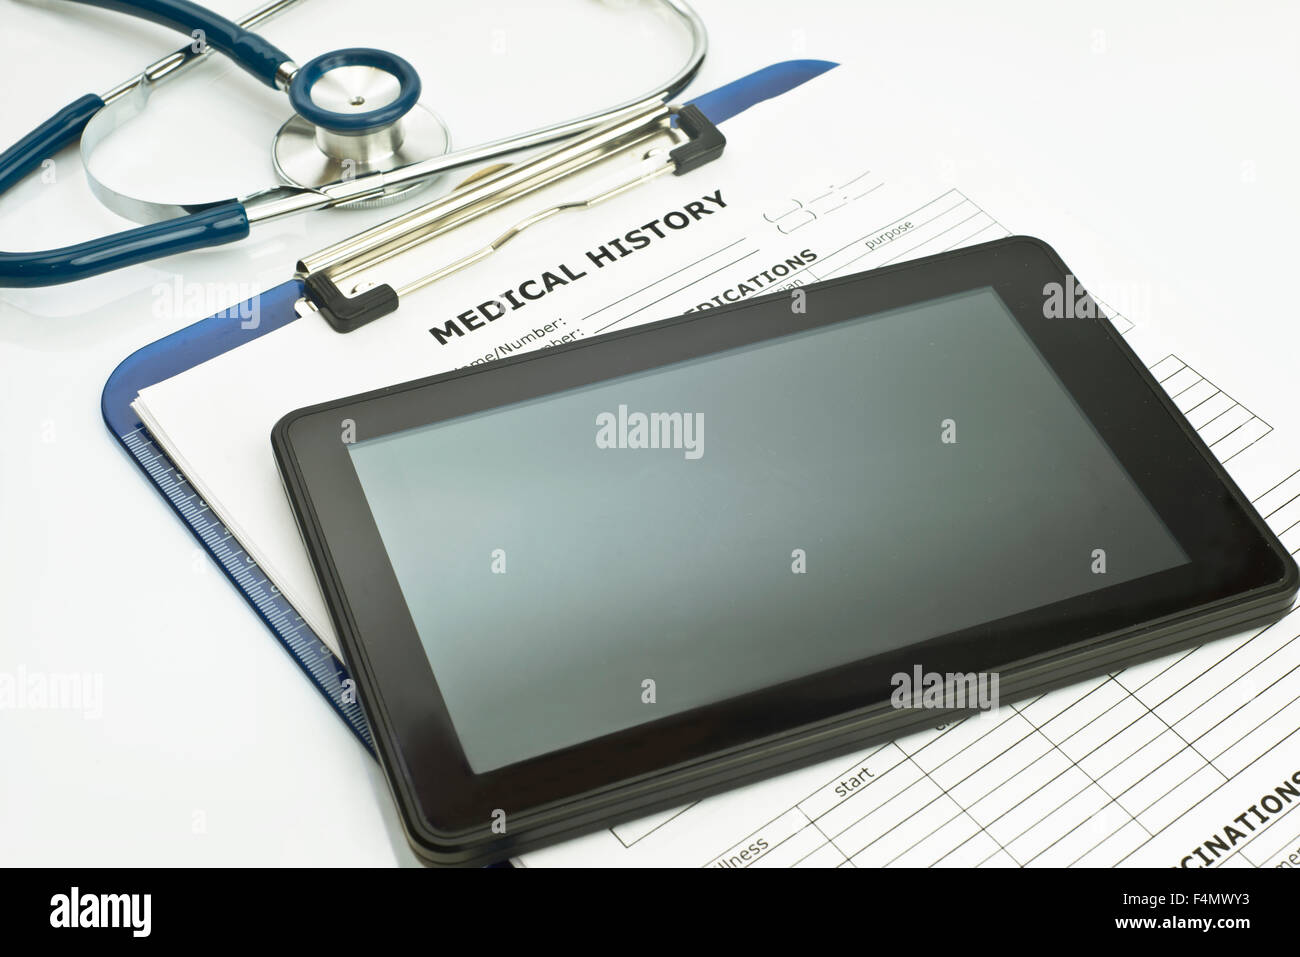 Personal computing device with stethoscope and patient medical record. Stock Photo